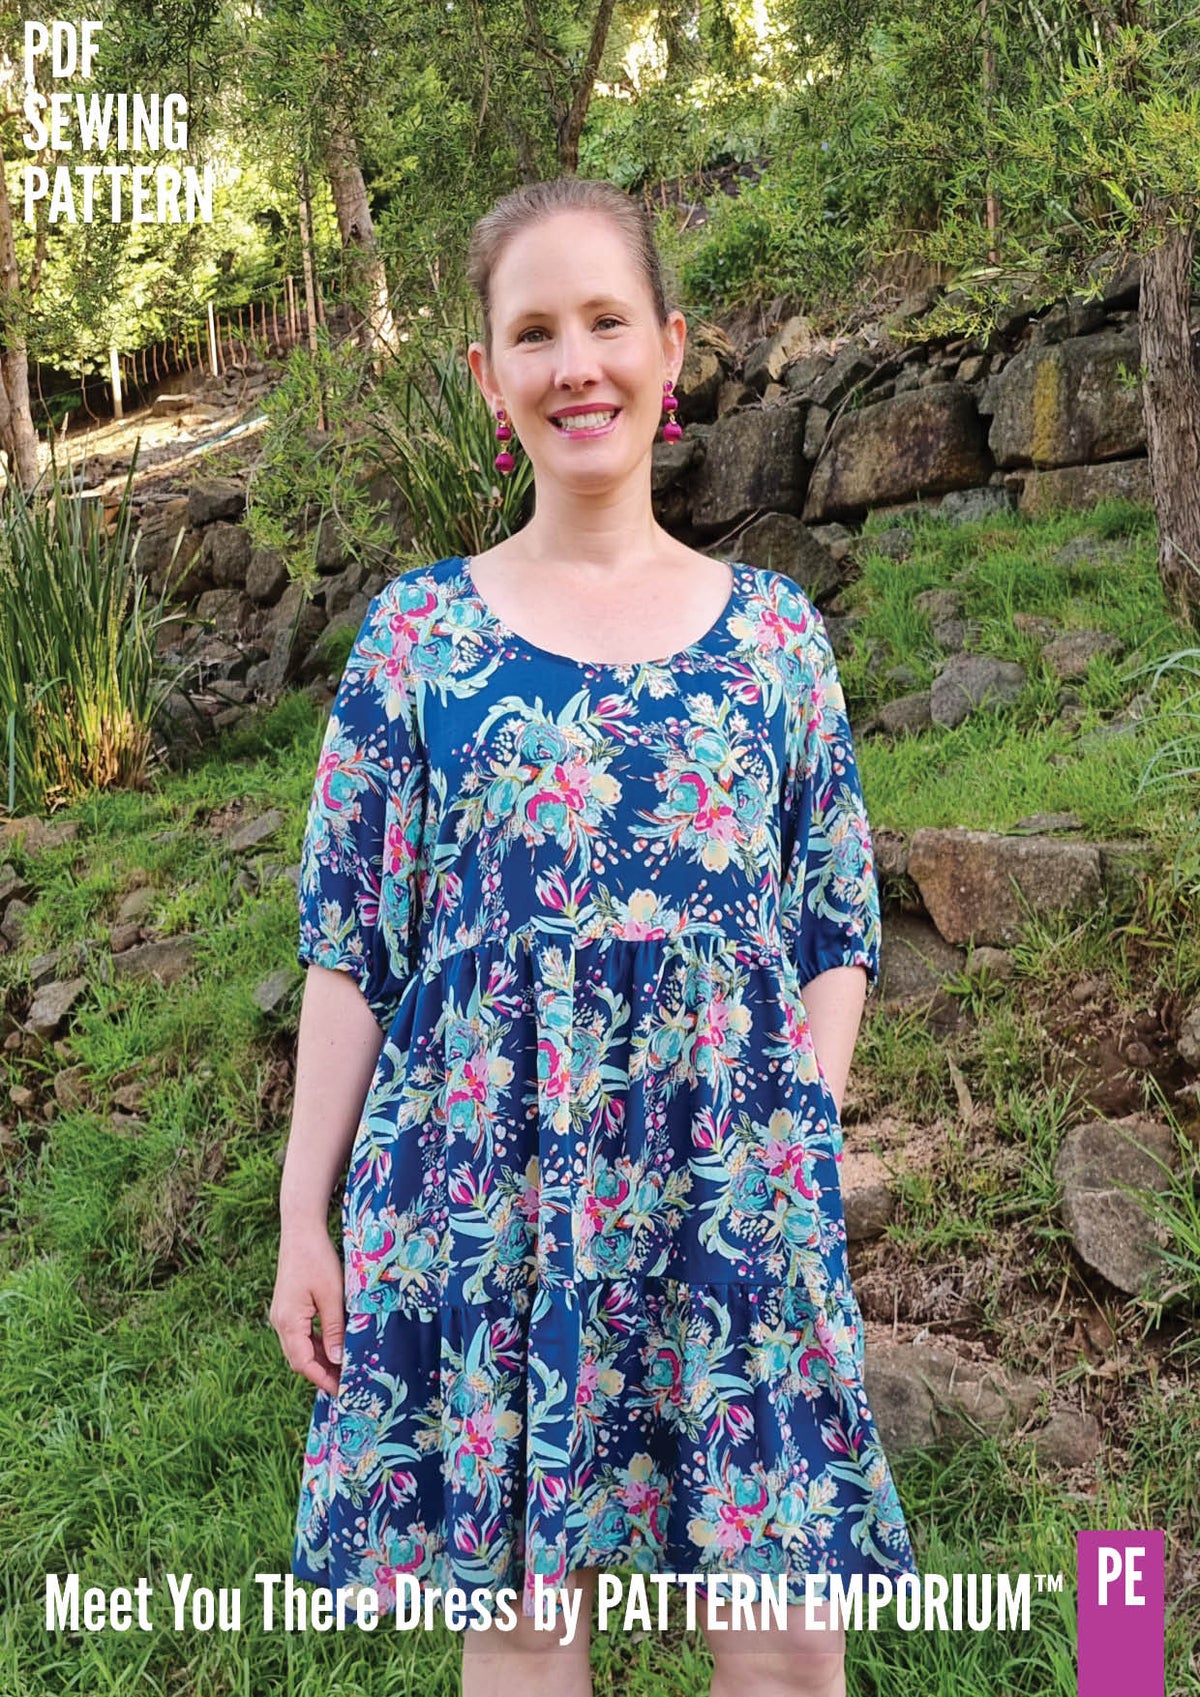 Pattern Emporium Meet You There Dress pattern review by melmom